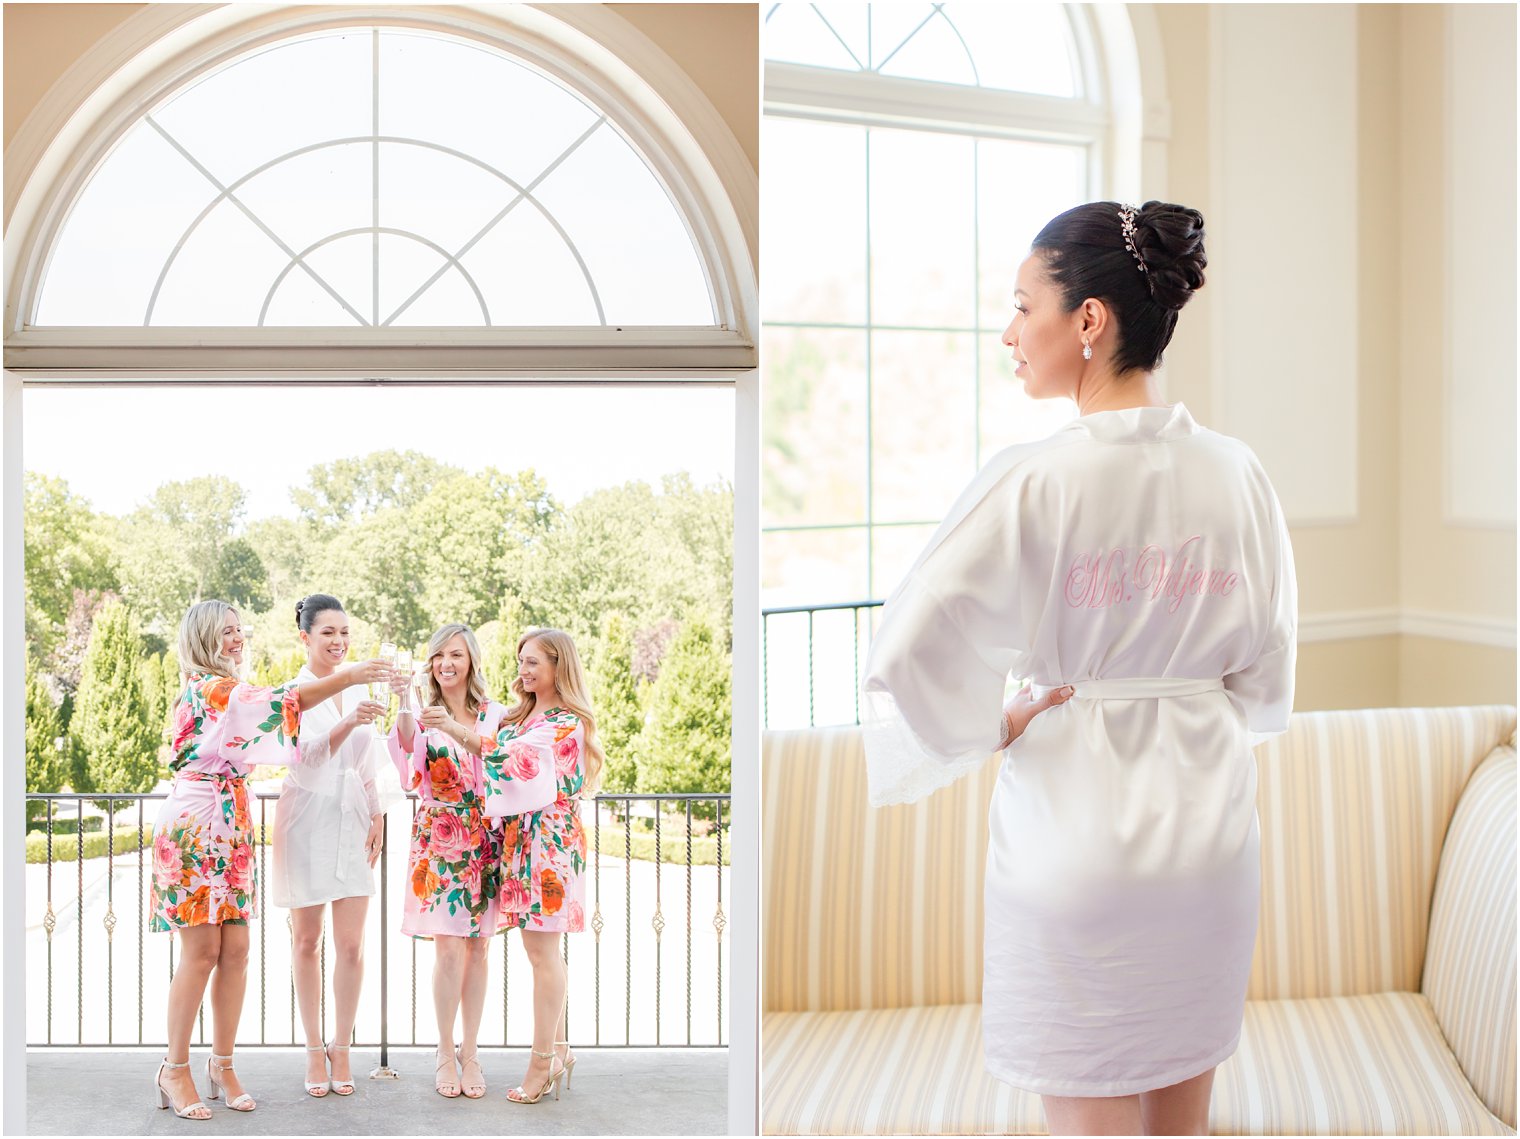 Bride and bridesmaids in custom robes